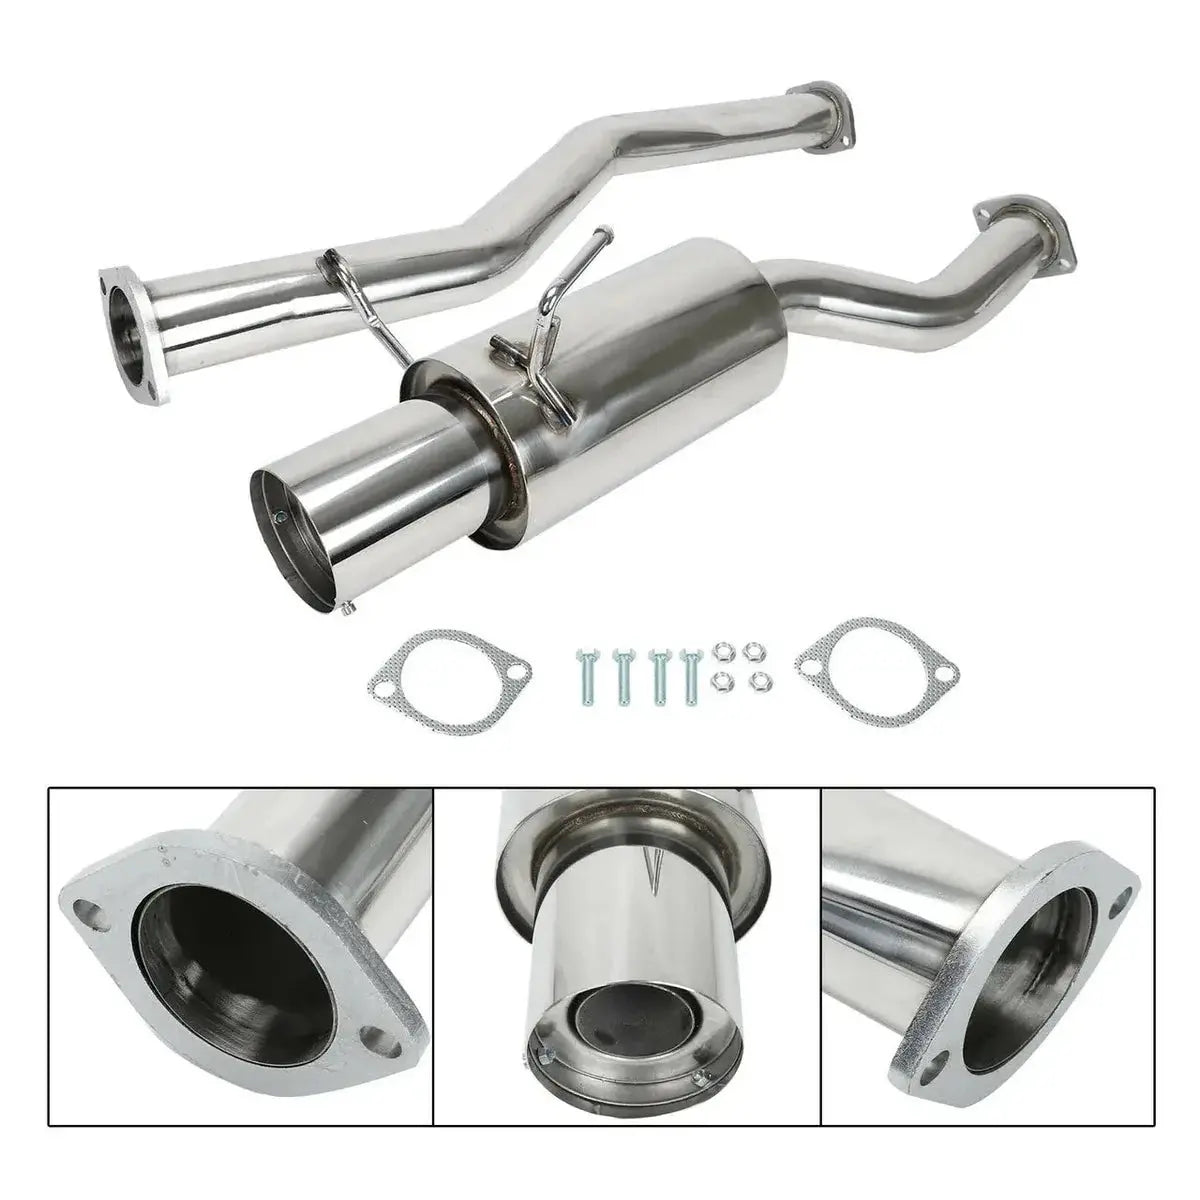 Exhaust Header/4.5" Single Tip 3" Pipe Catback Exhaust/Y Pipe Downpipe Exhaust for 2003-2006 Nissan 350Z 3.5L 2005, 2007 Infiniti G35 Flashark